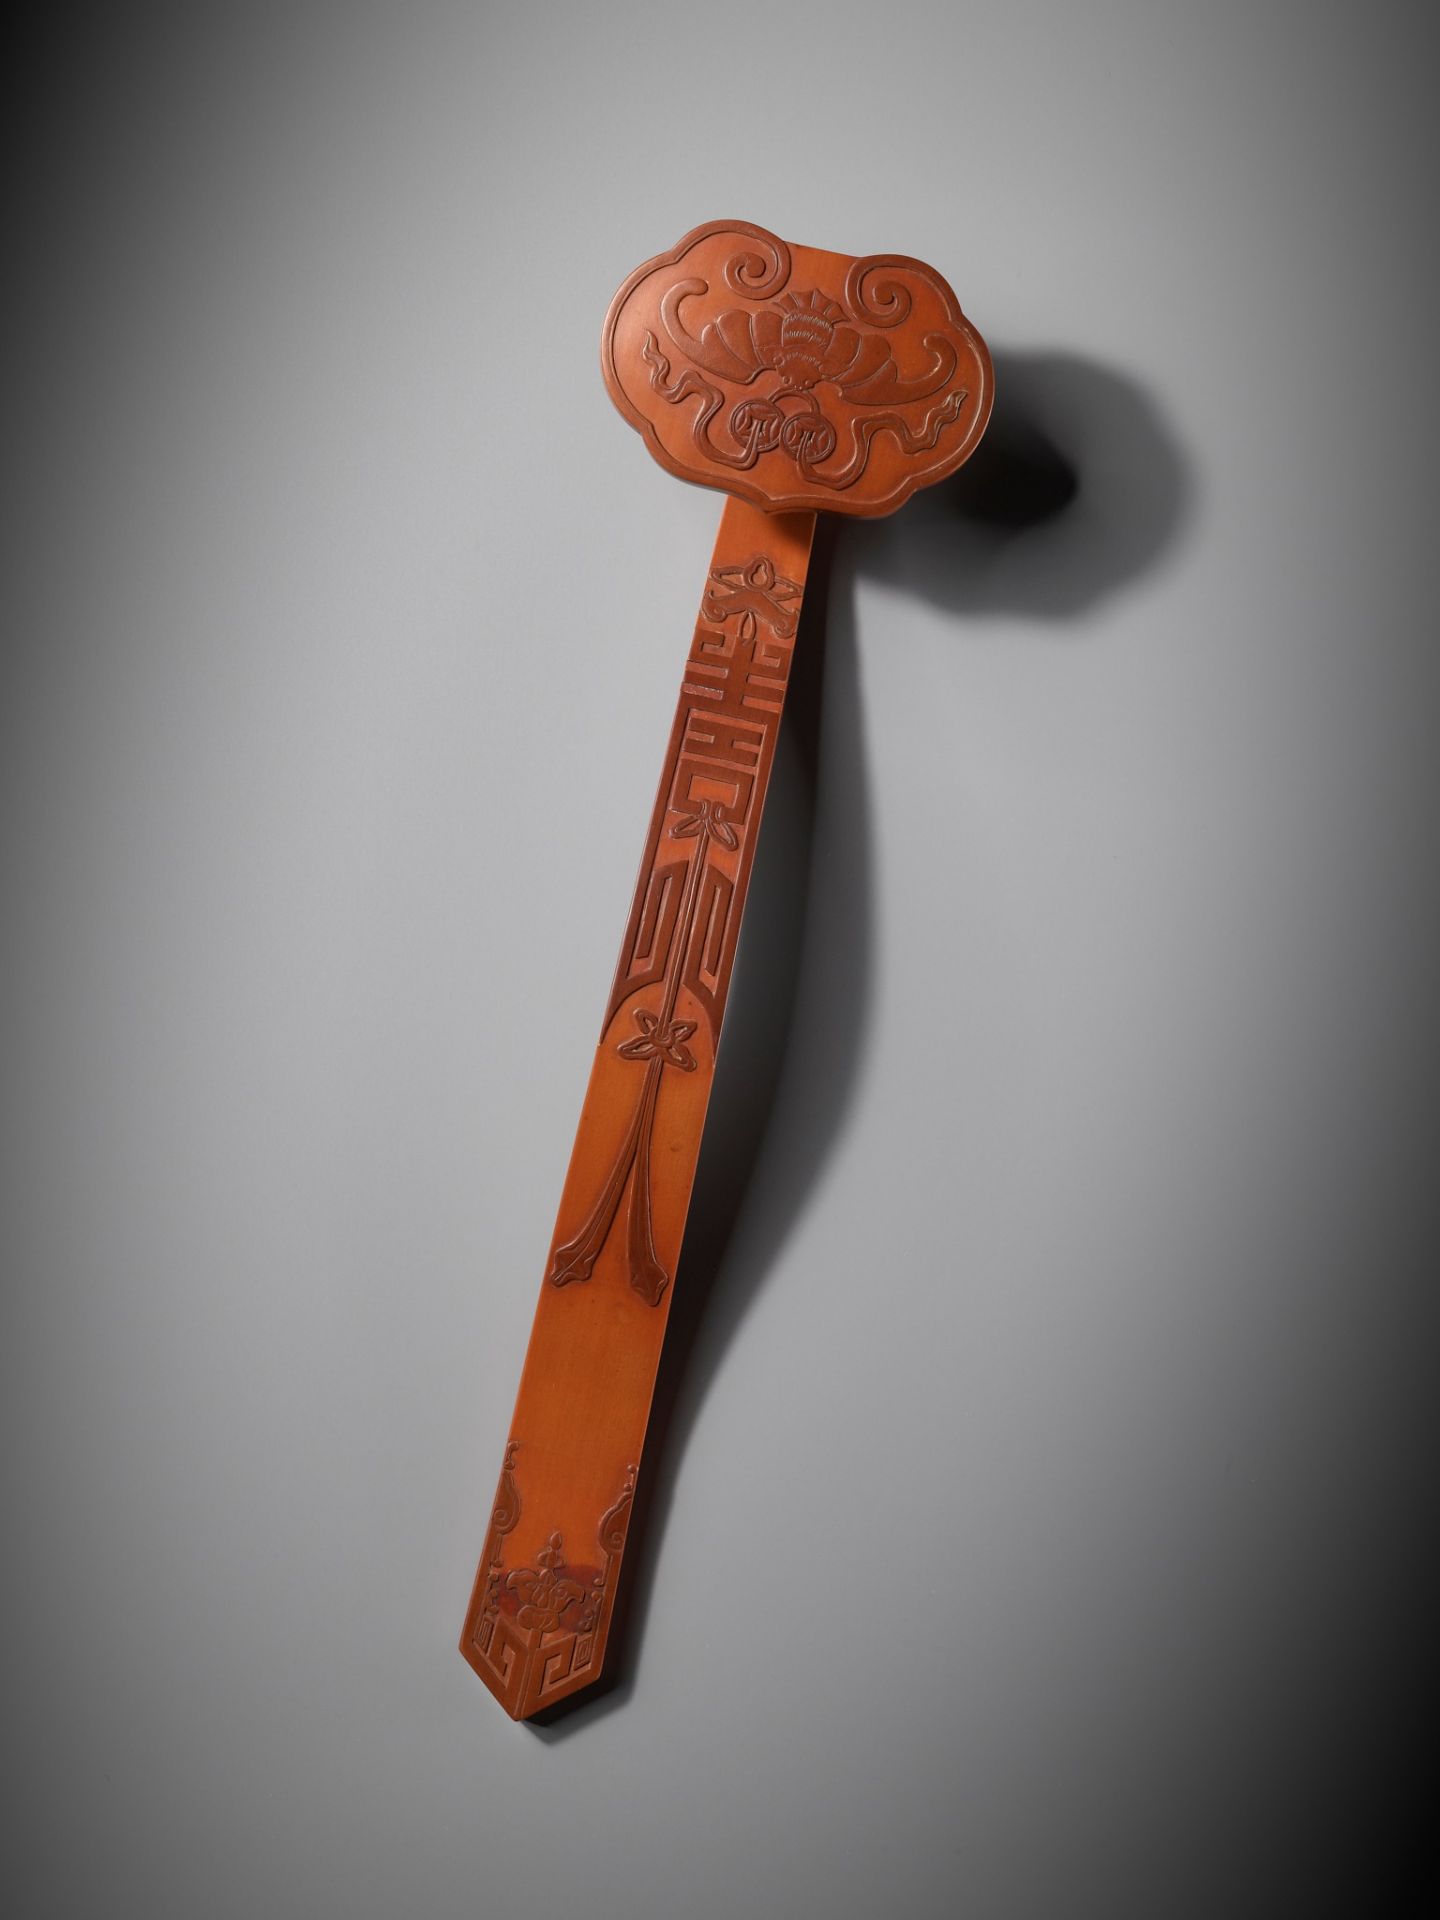 A RARE BAMBOO-VENEER RUYI SCEPTRE, QIANLONG PERIOD, IMPERIALLY INSCRIBED WITH A POEM - Image 2 of 15